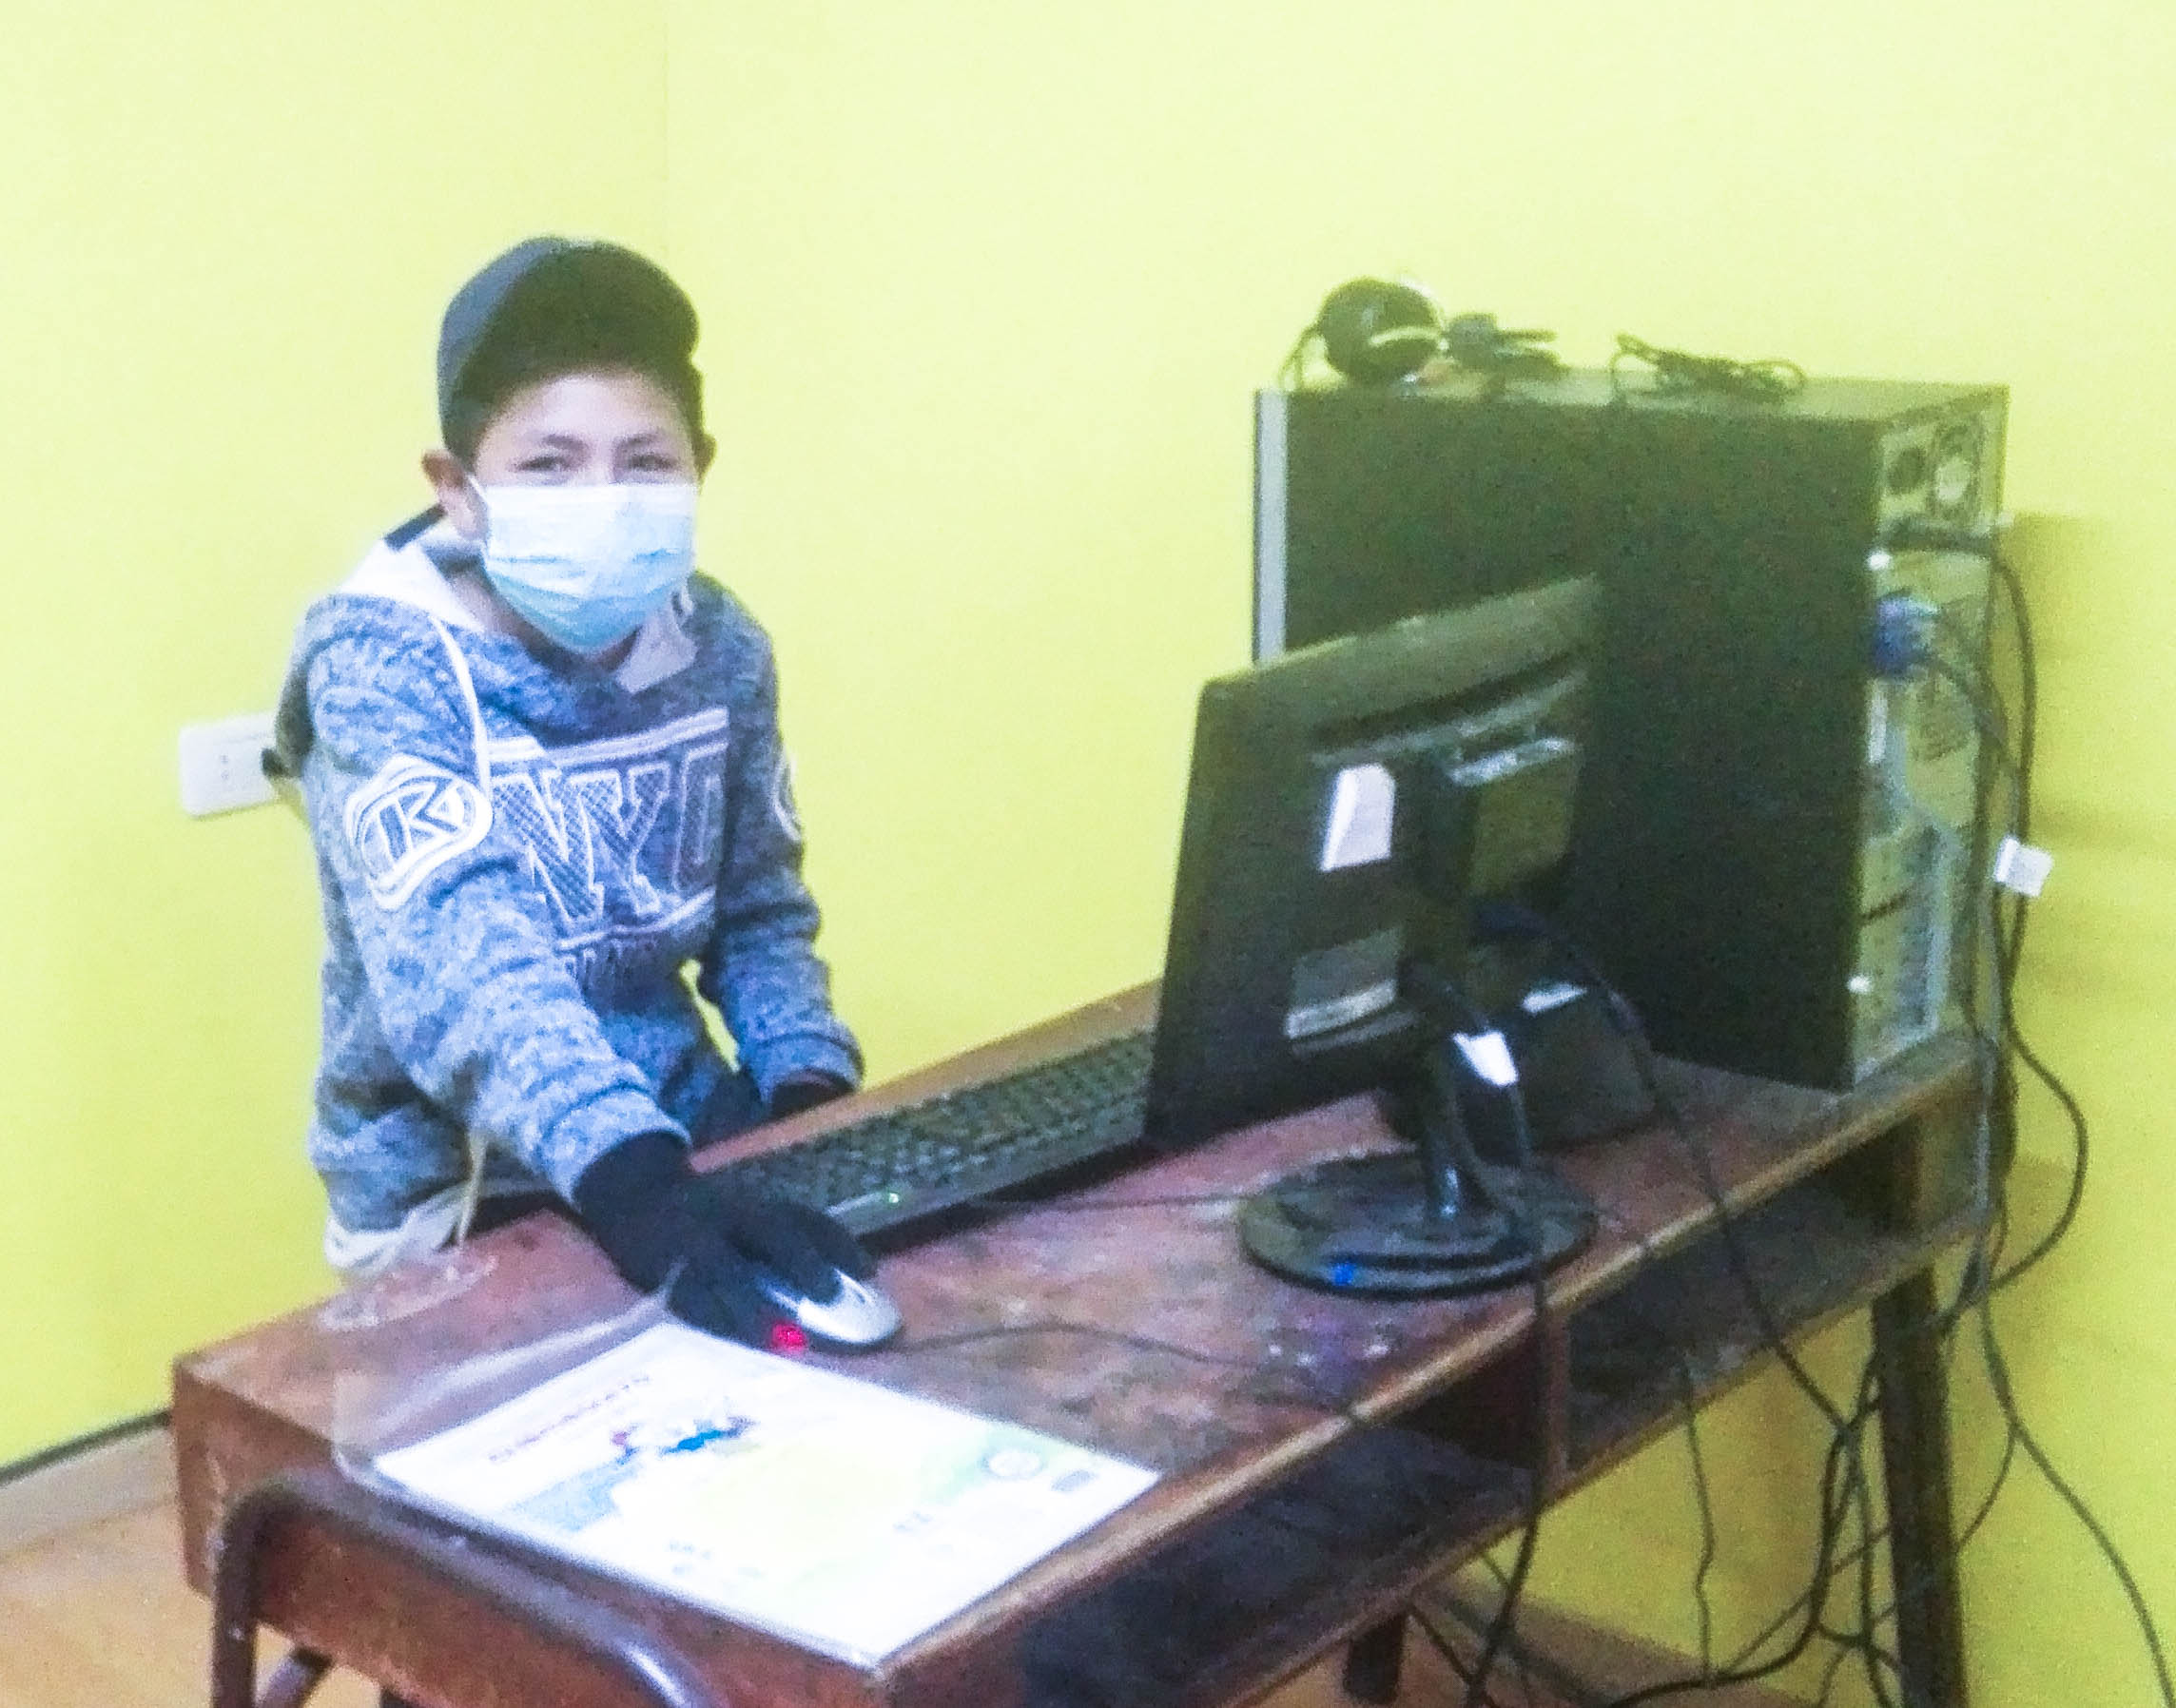 Access to Education: Internet service financed by SINERSA benefits students from the Ravira Rural Community